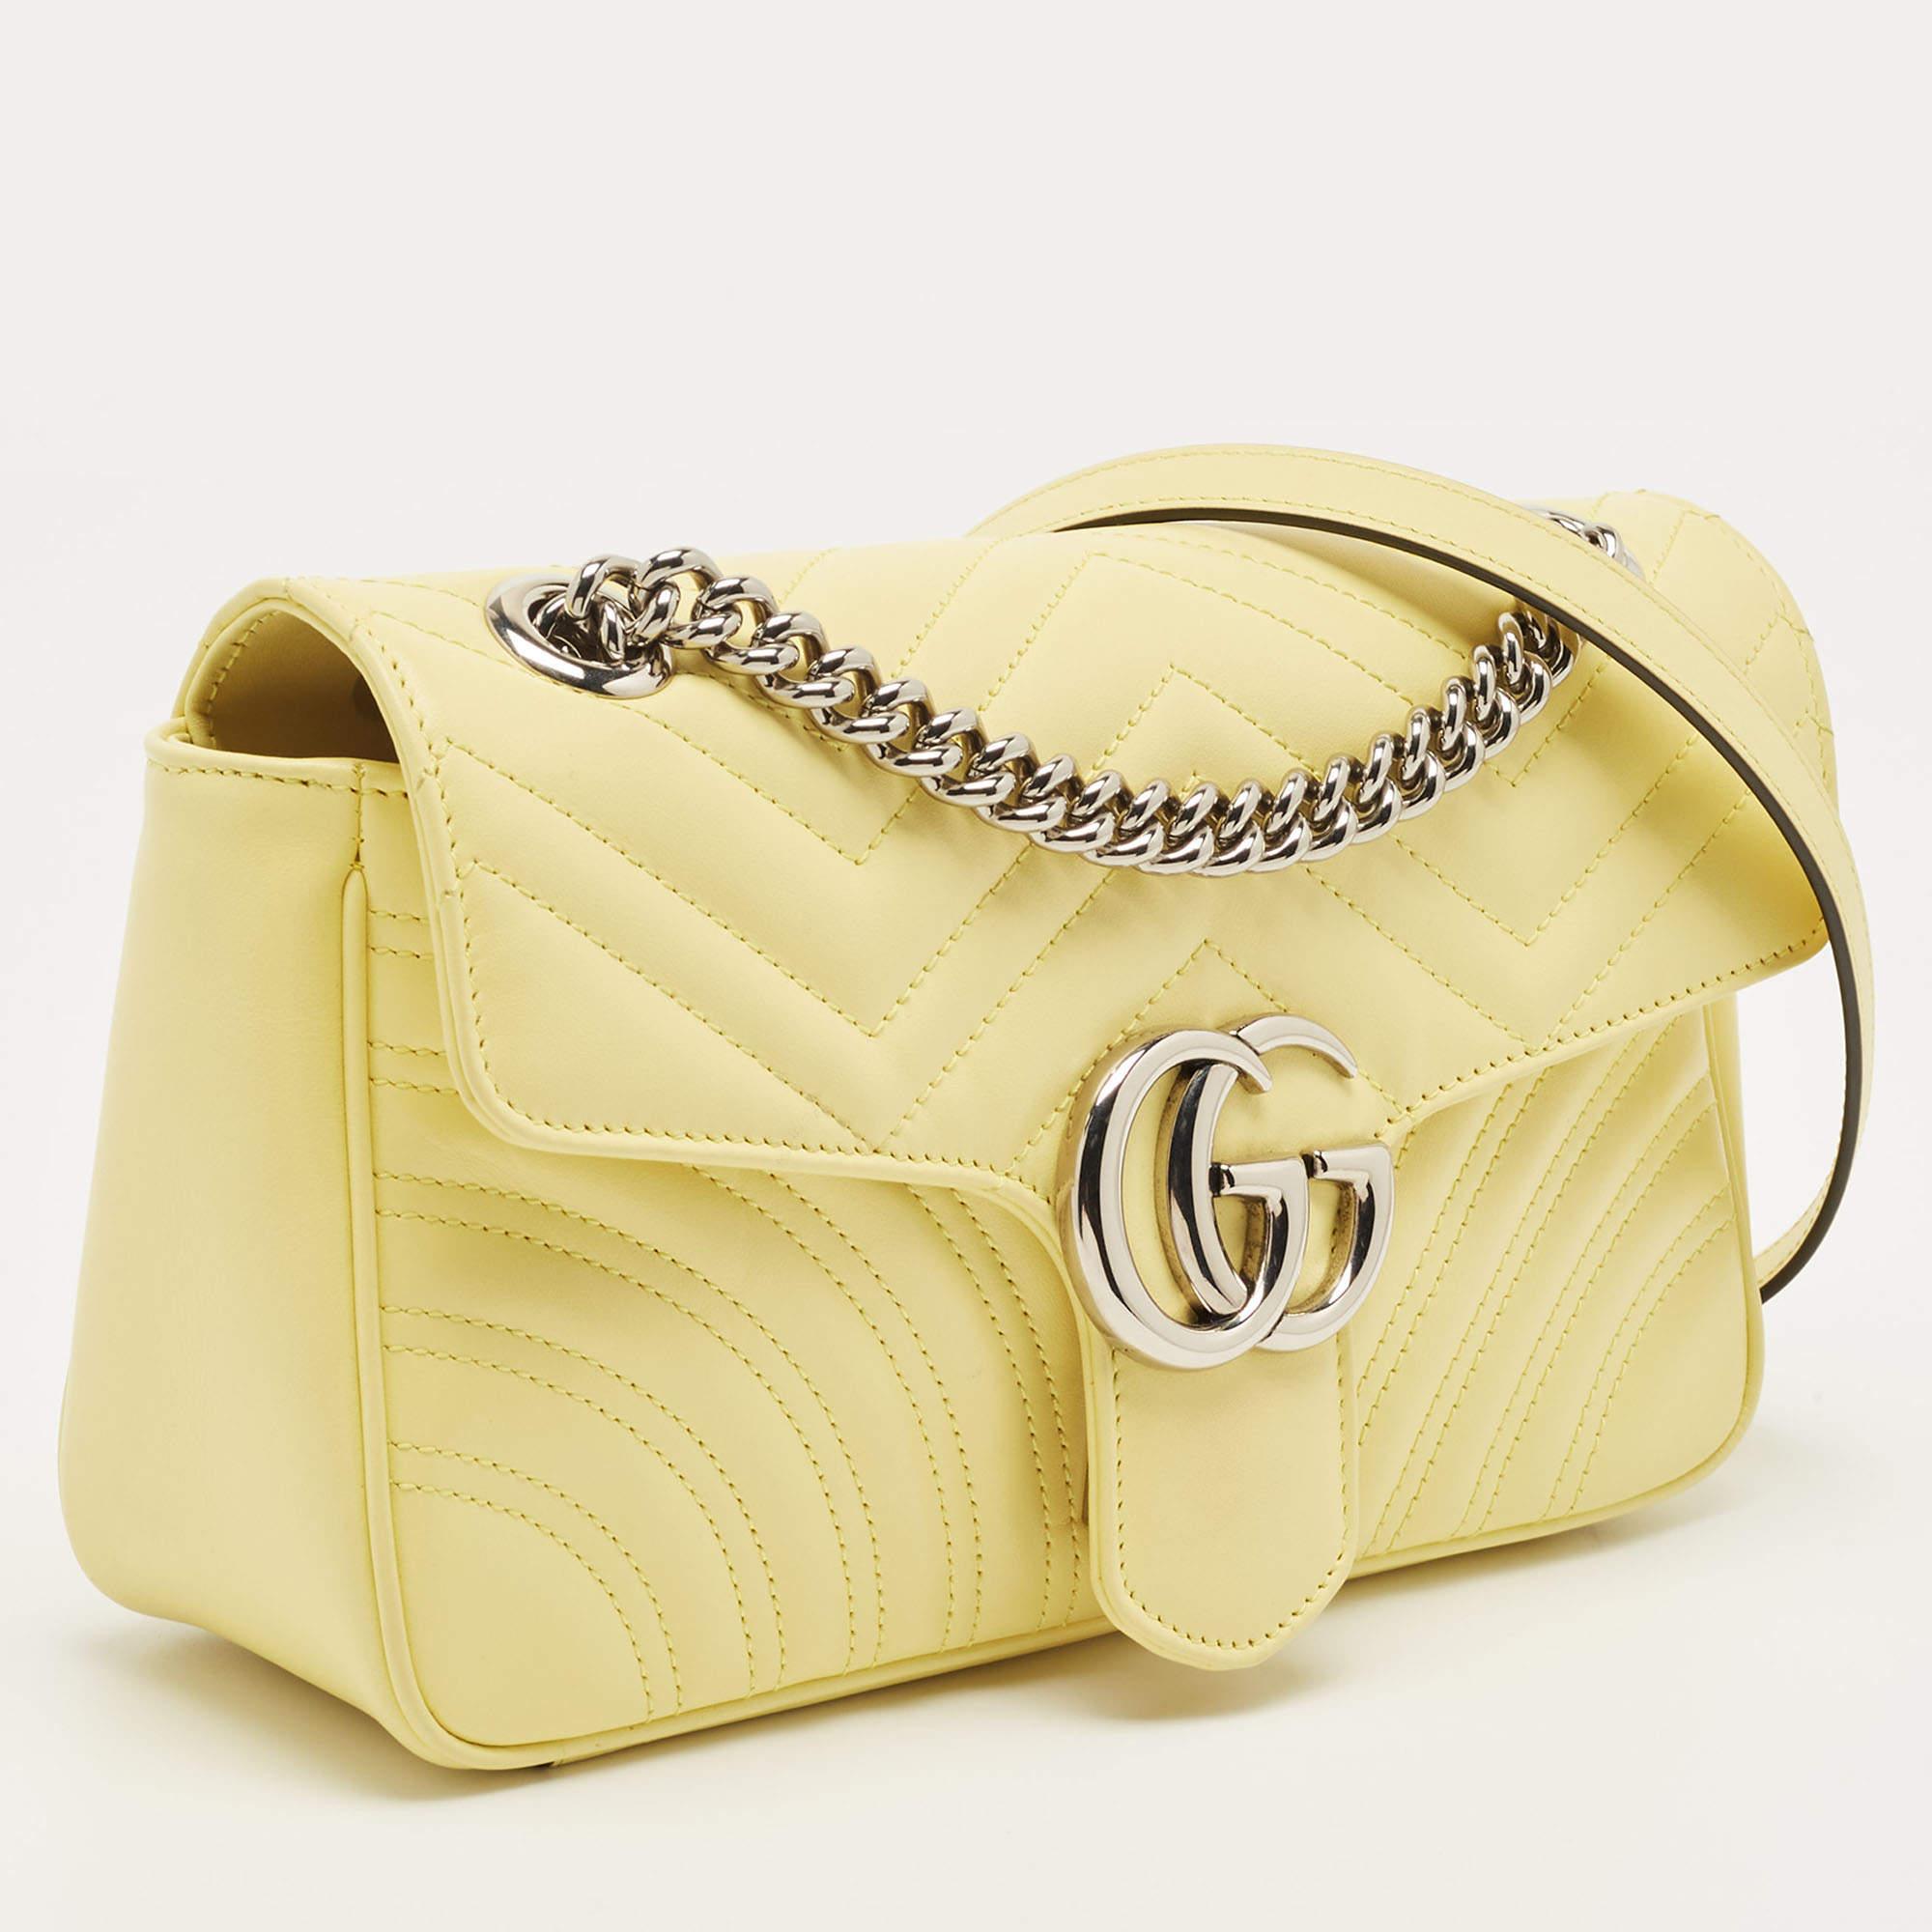 Gucci Yellow Matelassé Leather Small GG Marmont Shoulder Bag 9